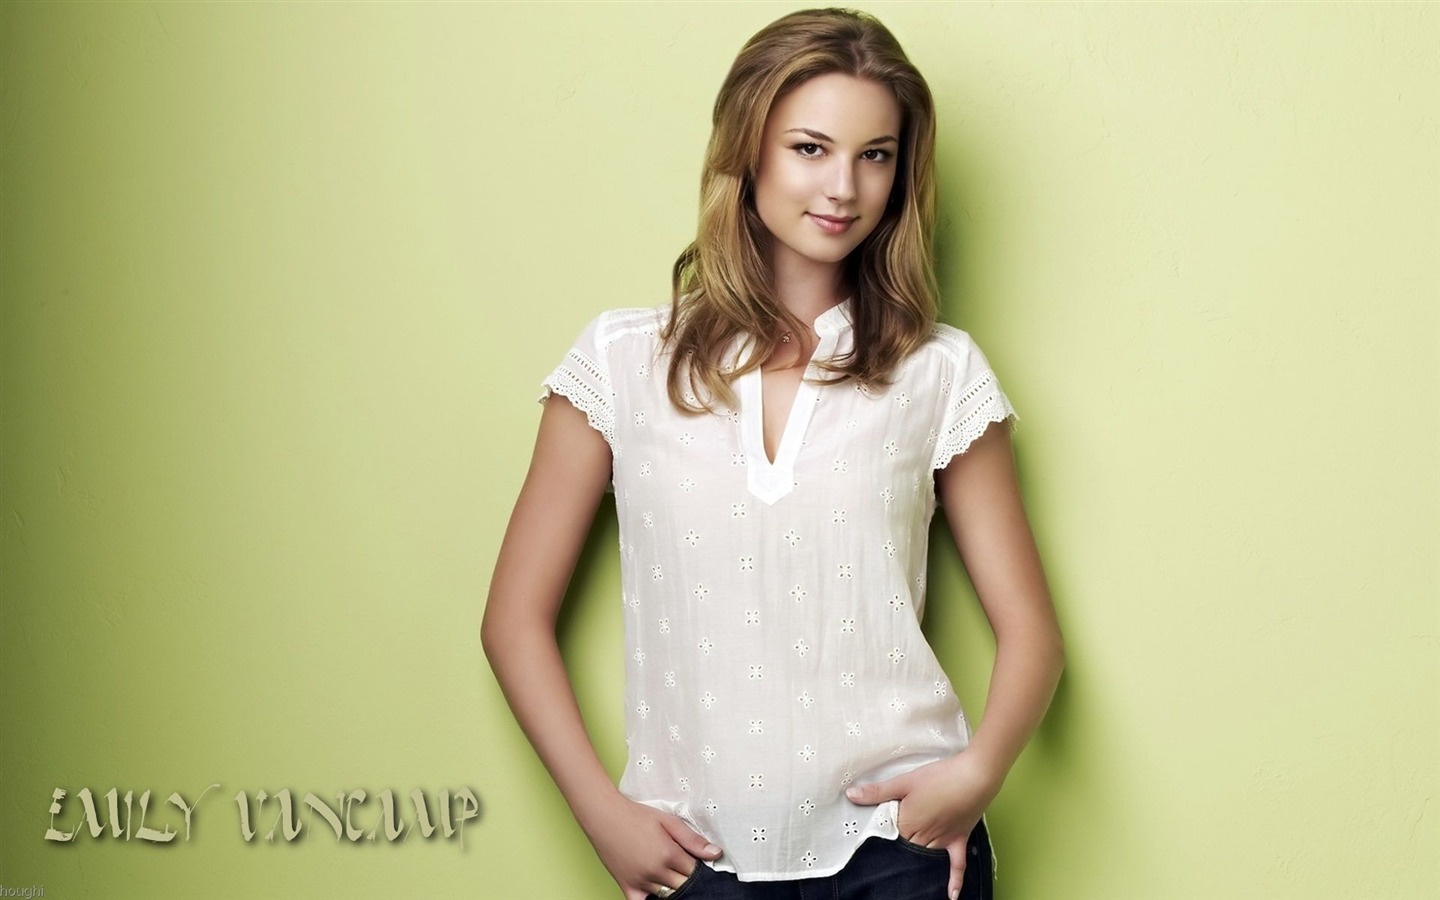 Emily VanCamp #003 - 1440x900 Wallpapers Pictures Photos Images